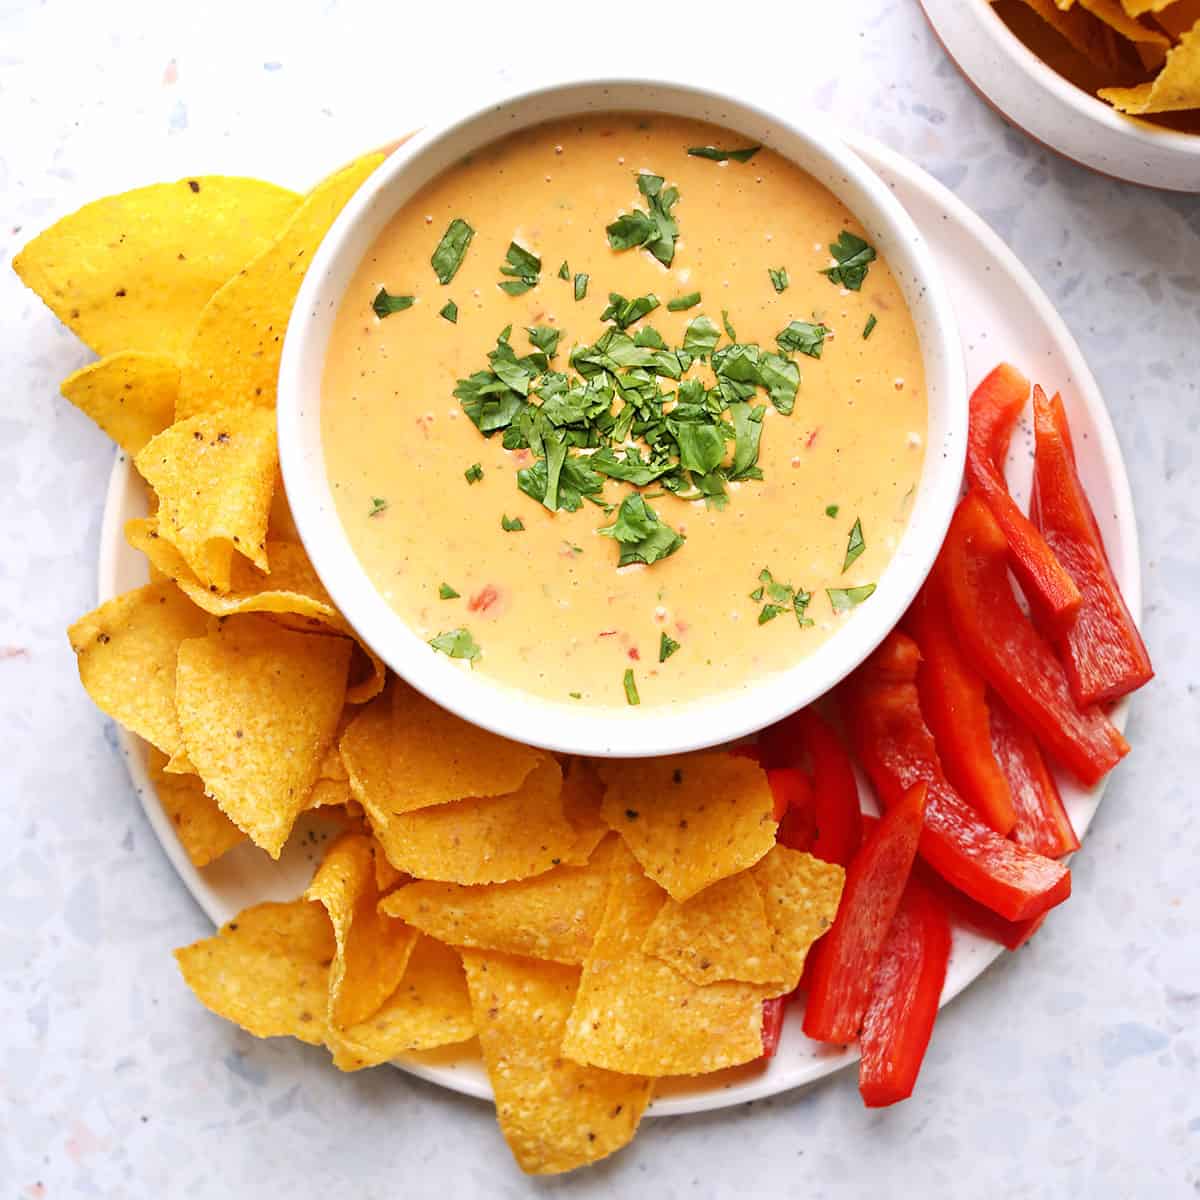 20 Easy Dips You Can Make in 5 Minutes or Less Using Your Food